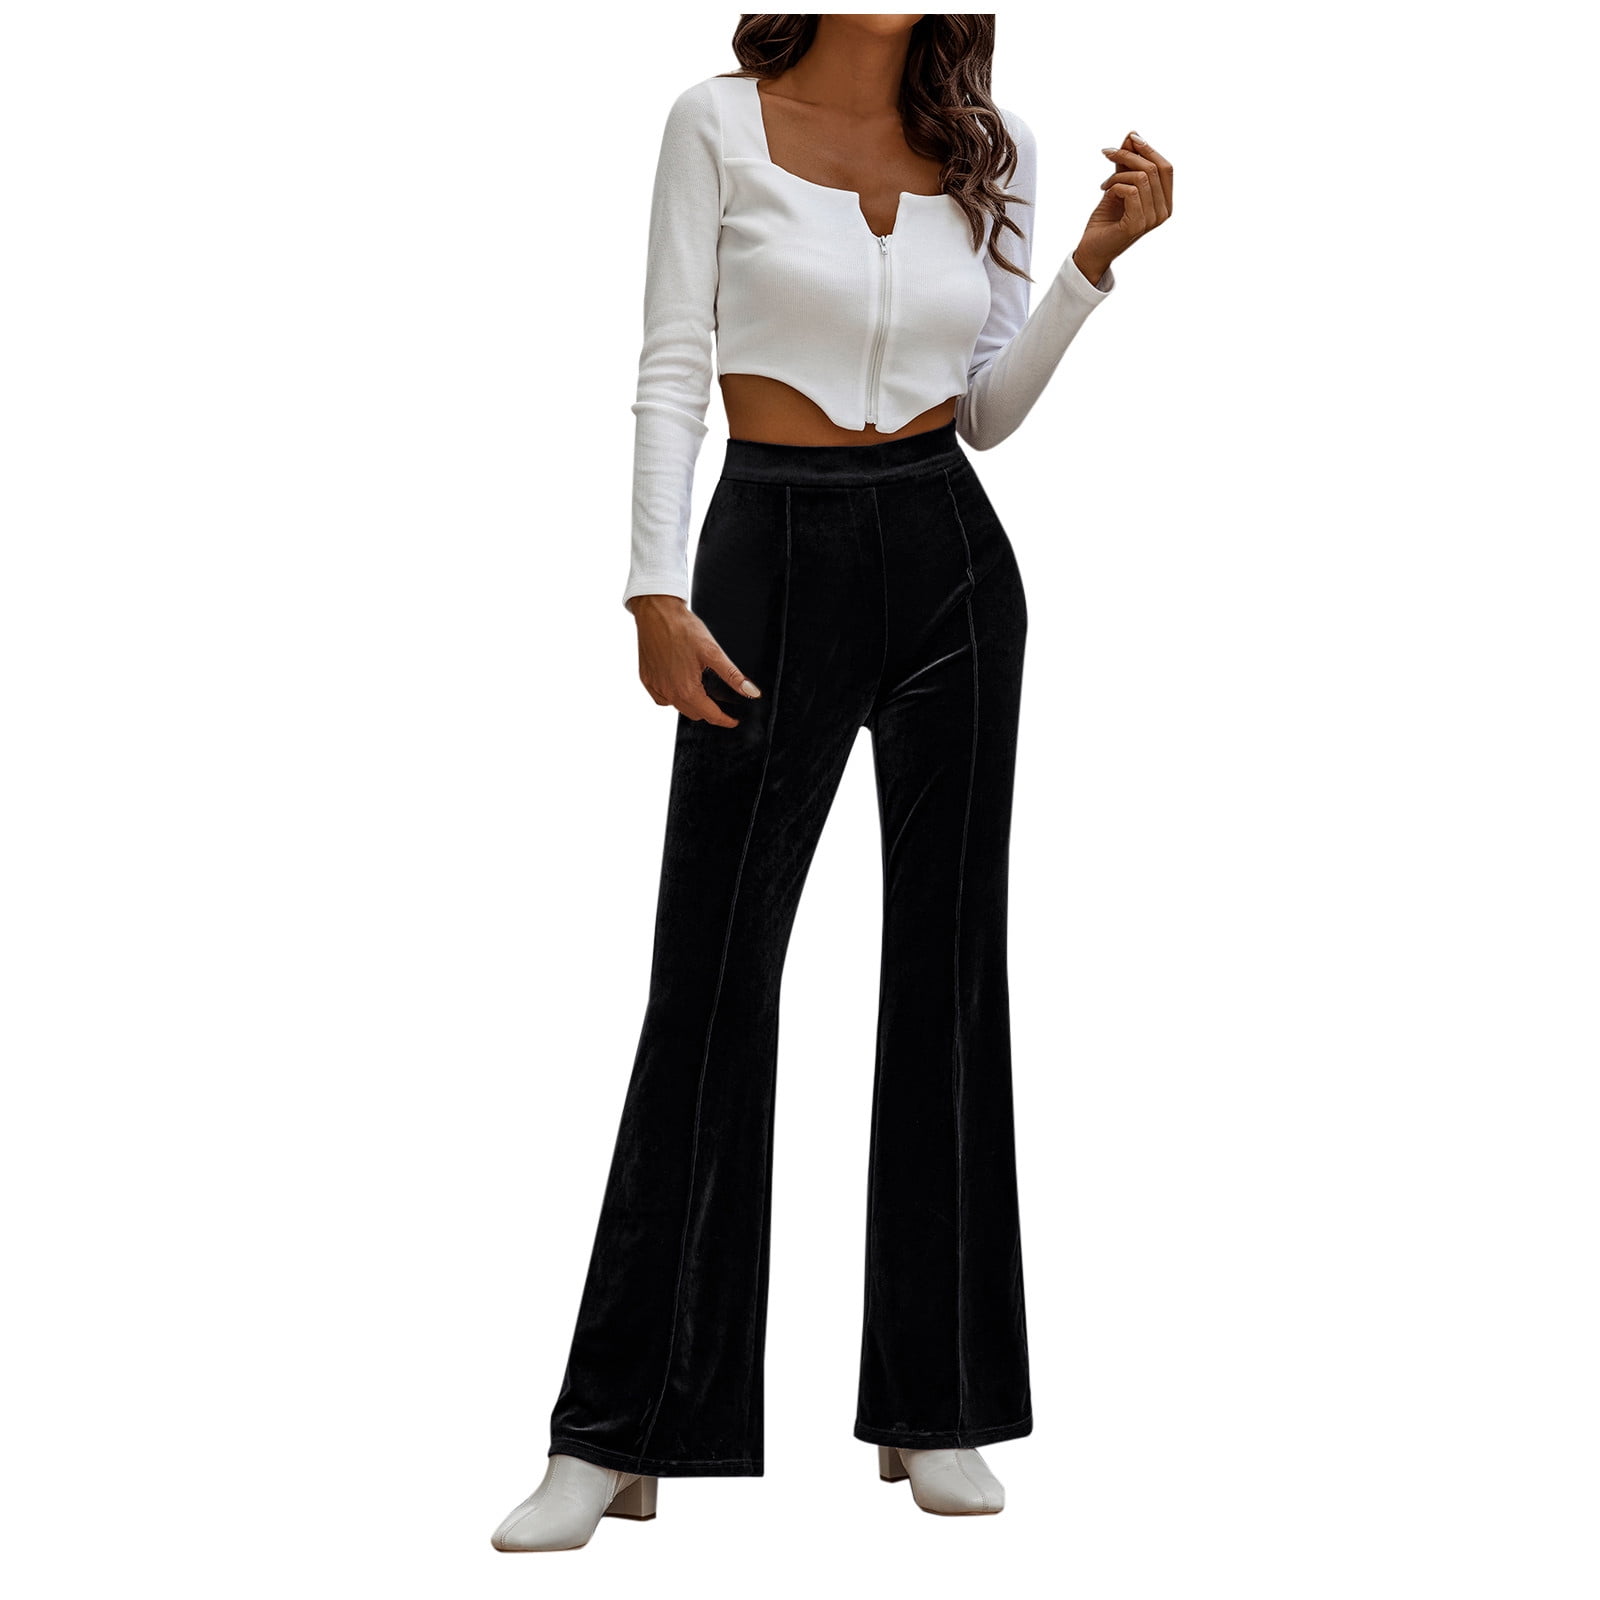 Womens High Waist Casual Fashion Trousers Velvet Slim Fit Long Flare Pants  Size